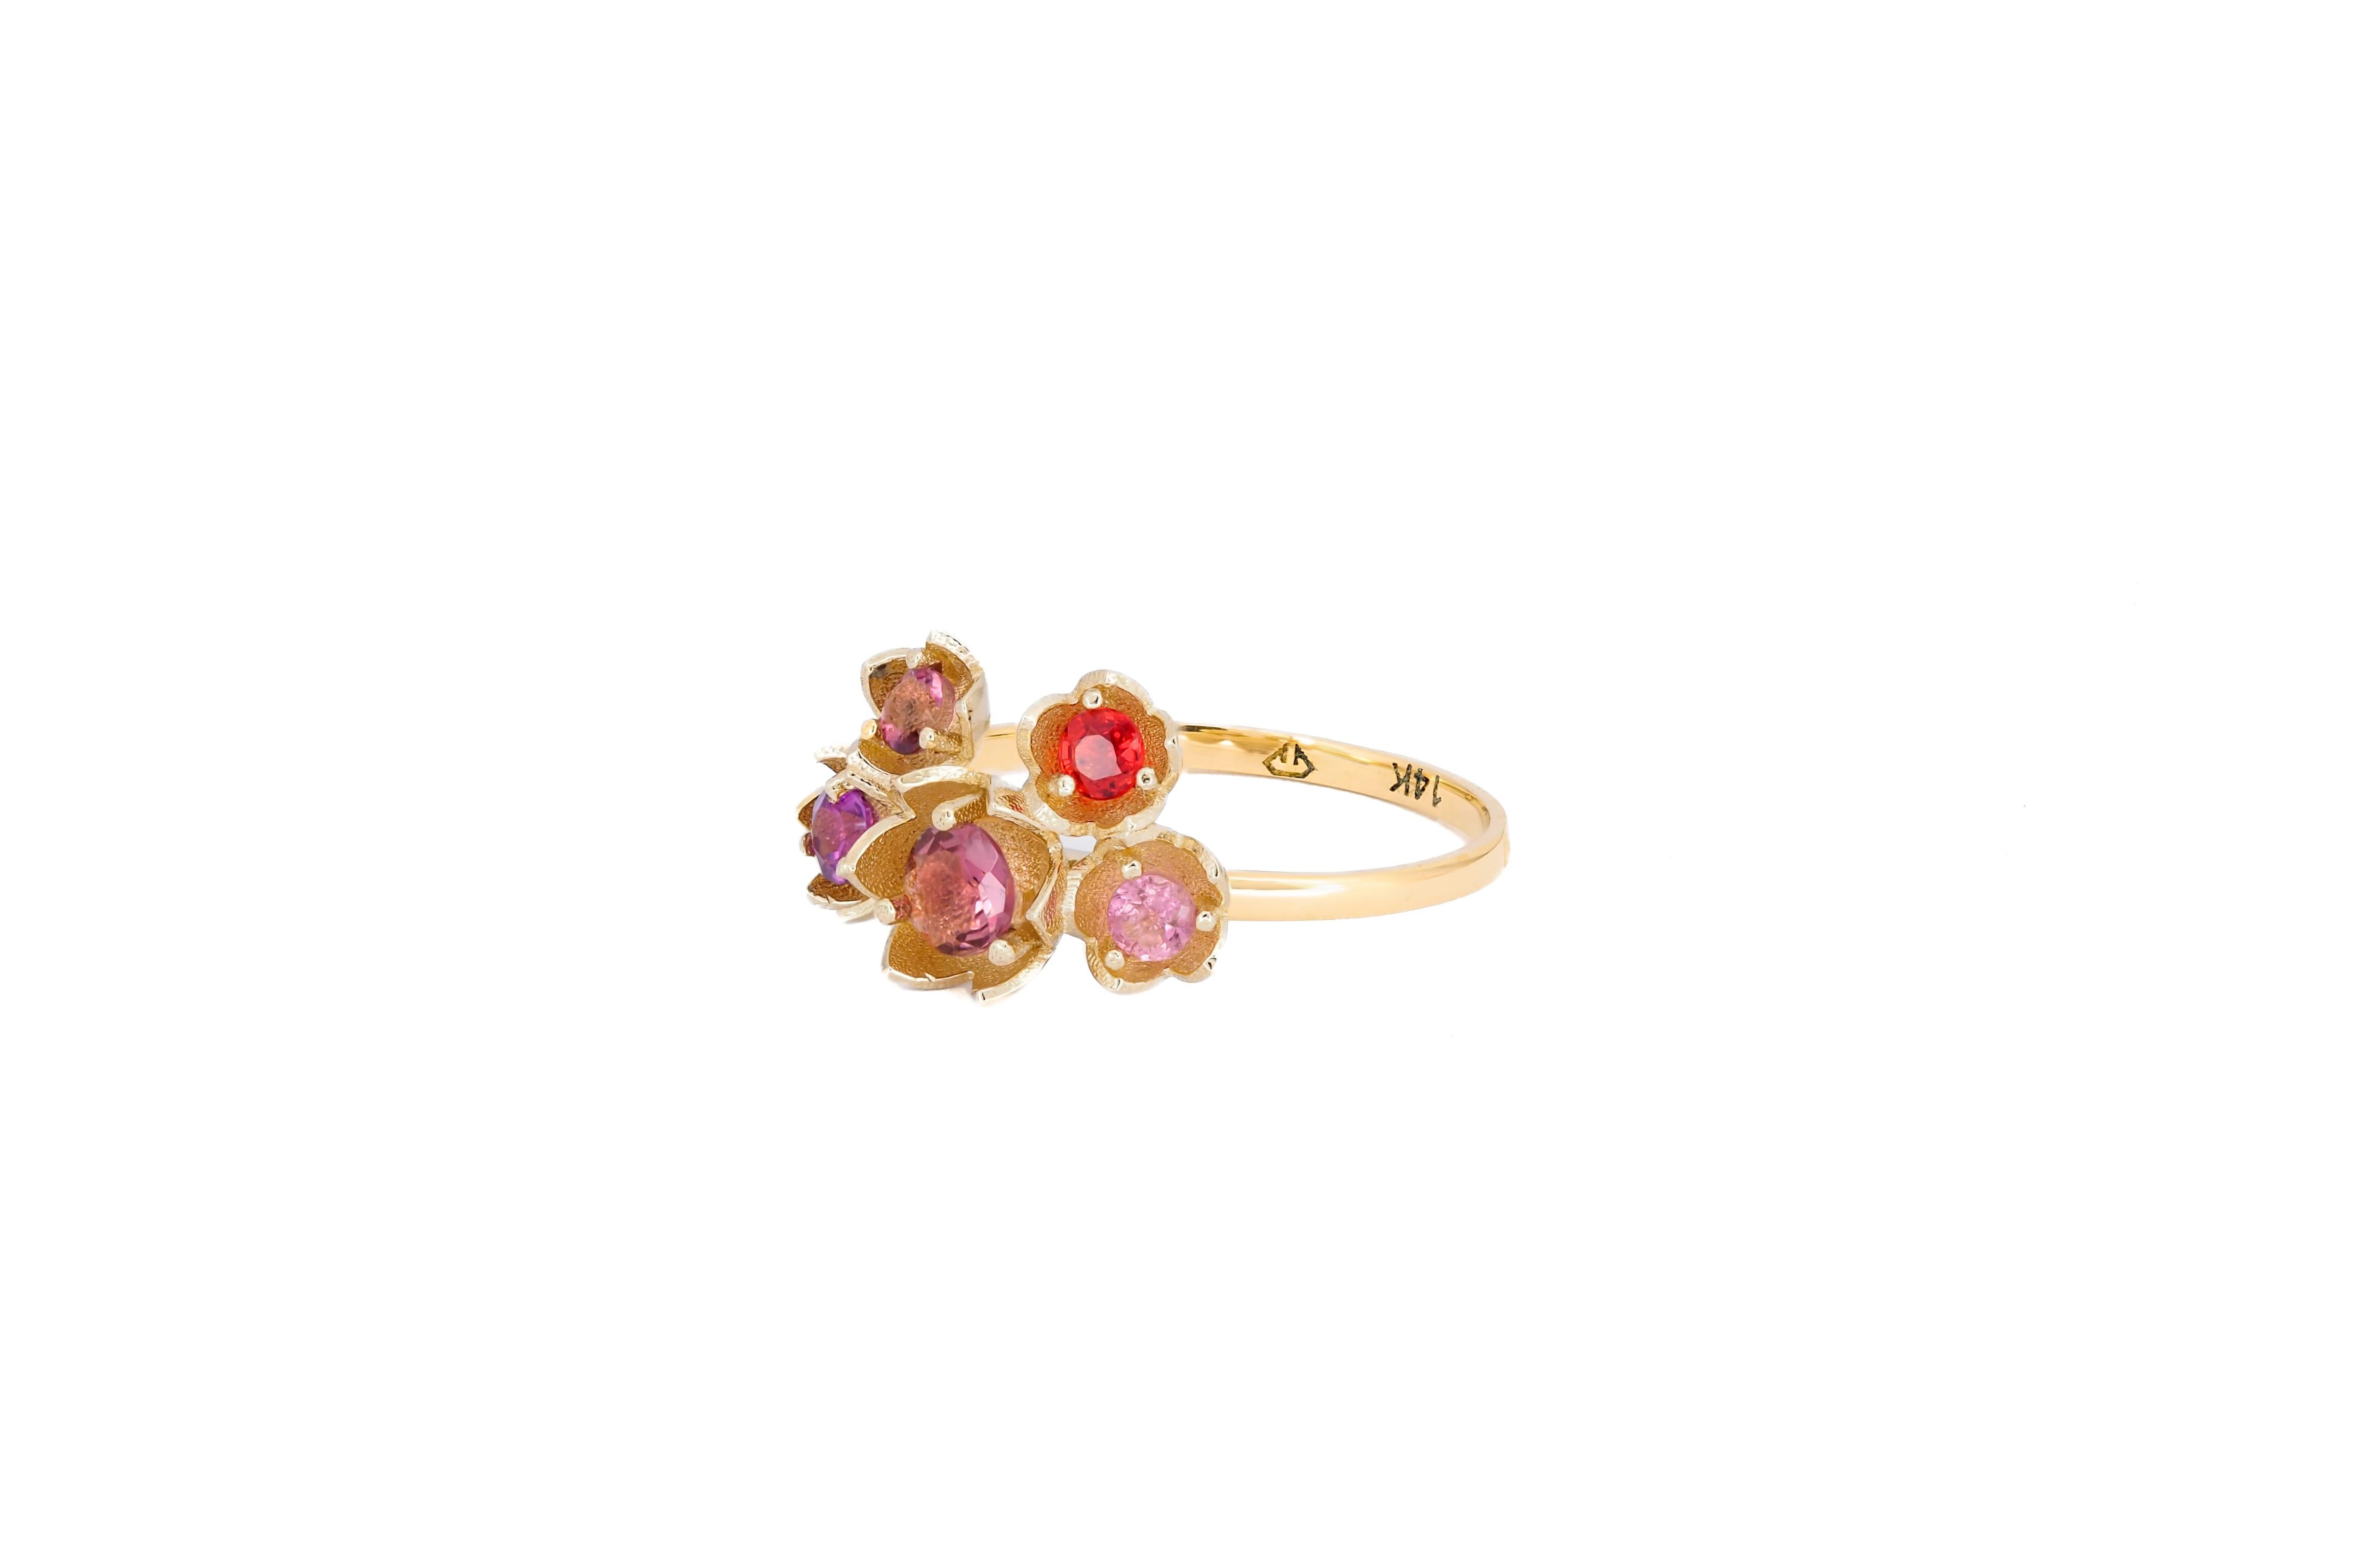 For Sale:  14 karat gold Blossom ring with multicolored gemstones. Pink Tourmaline ring 3